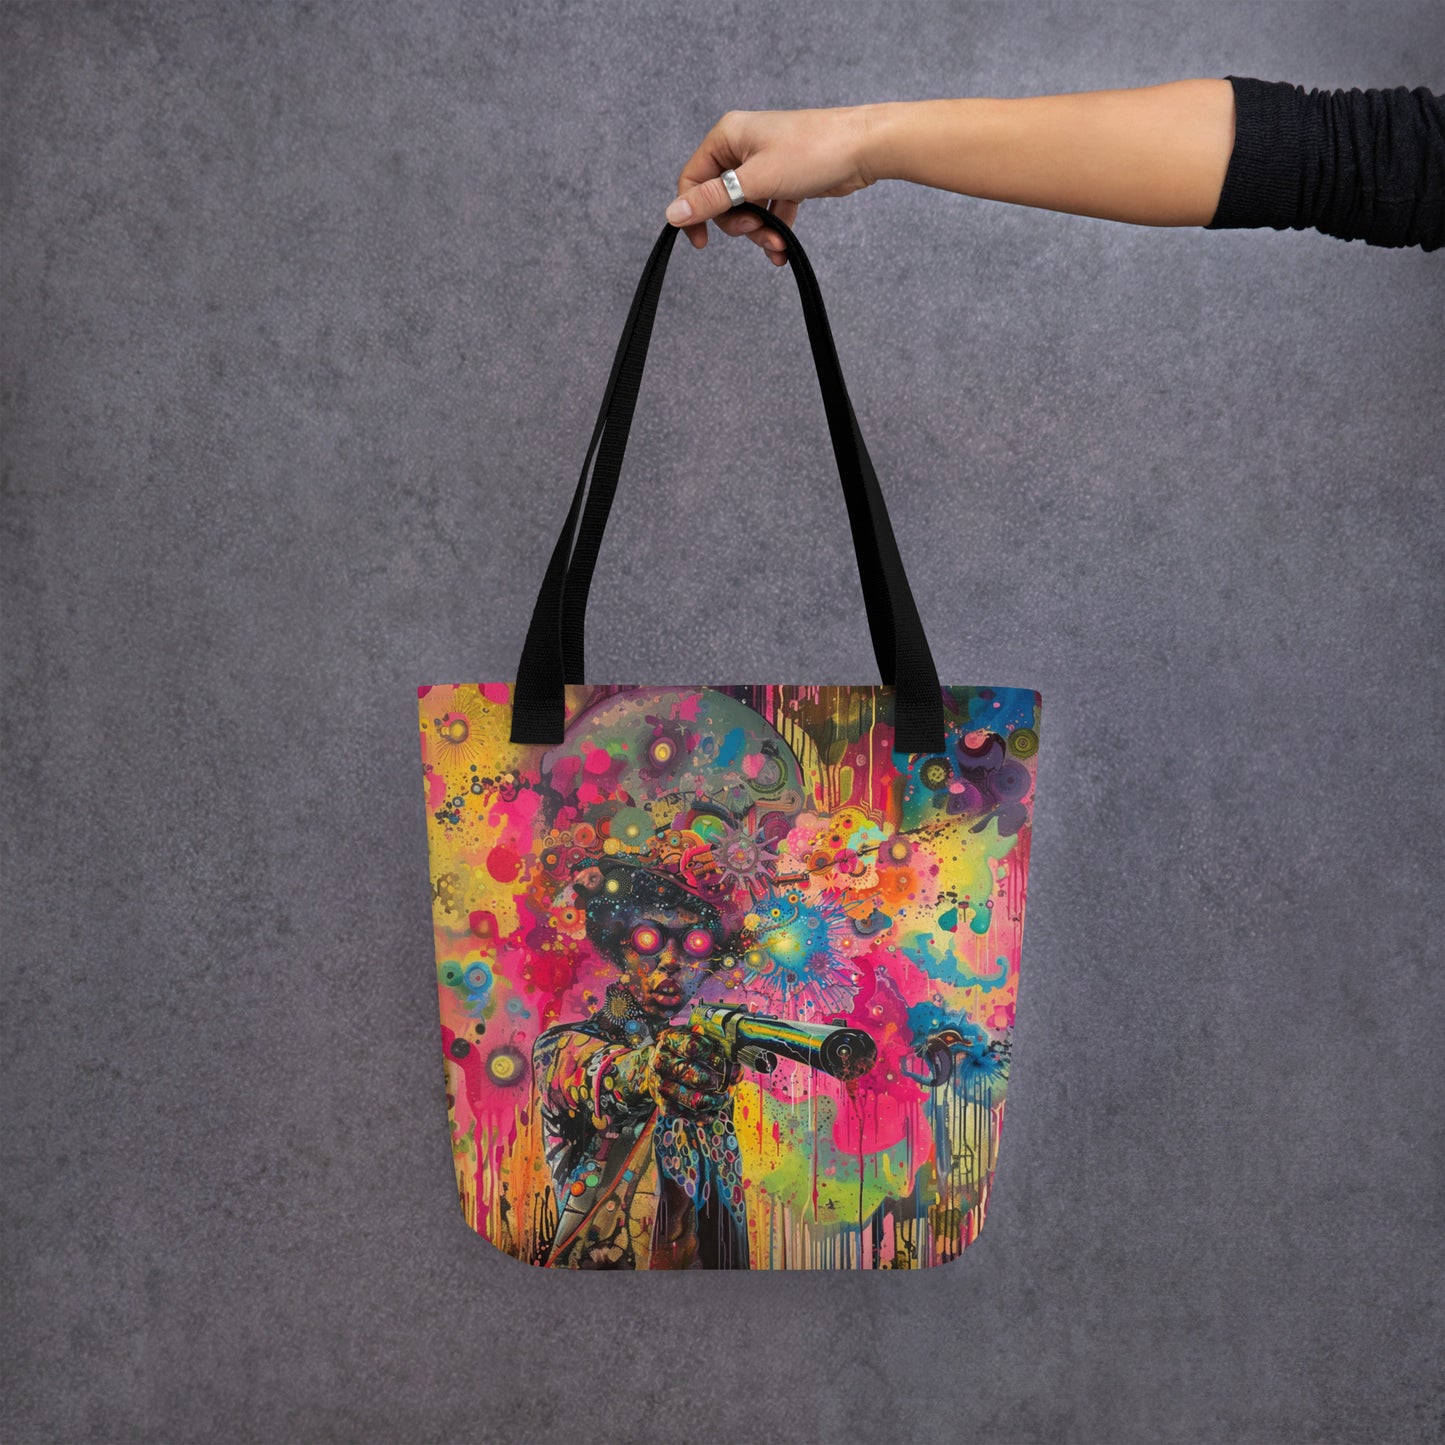 Afro Bussin' Tote Bag